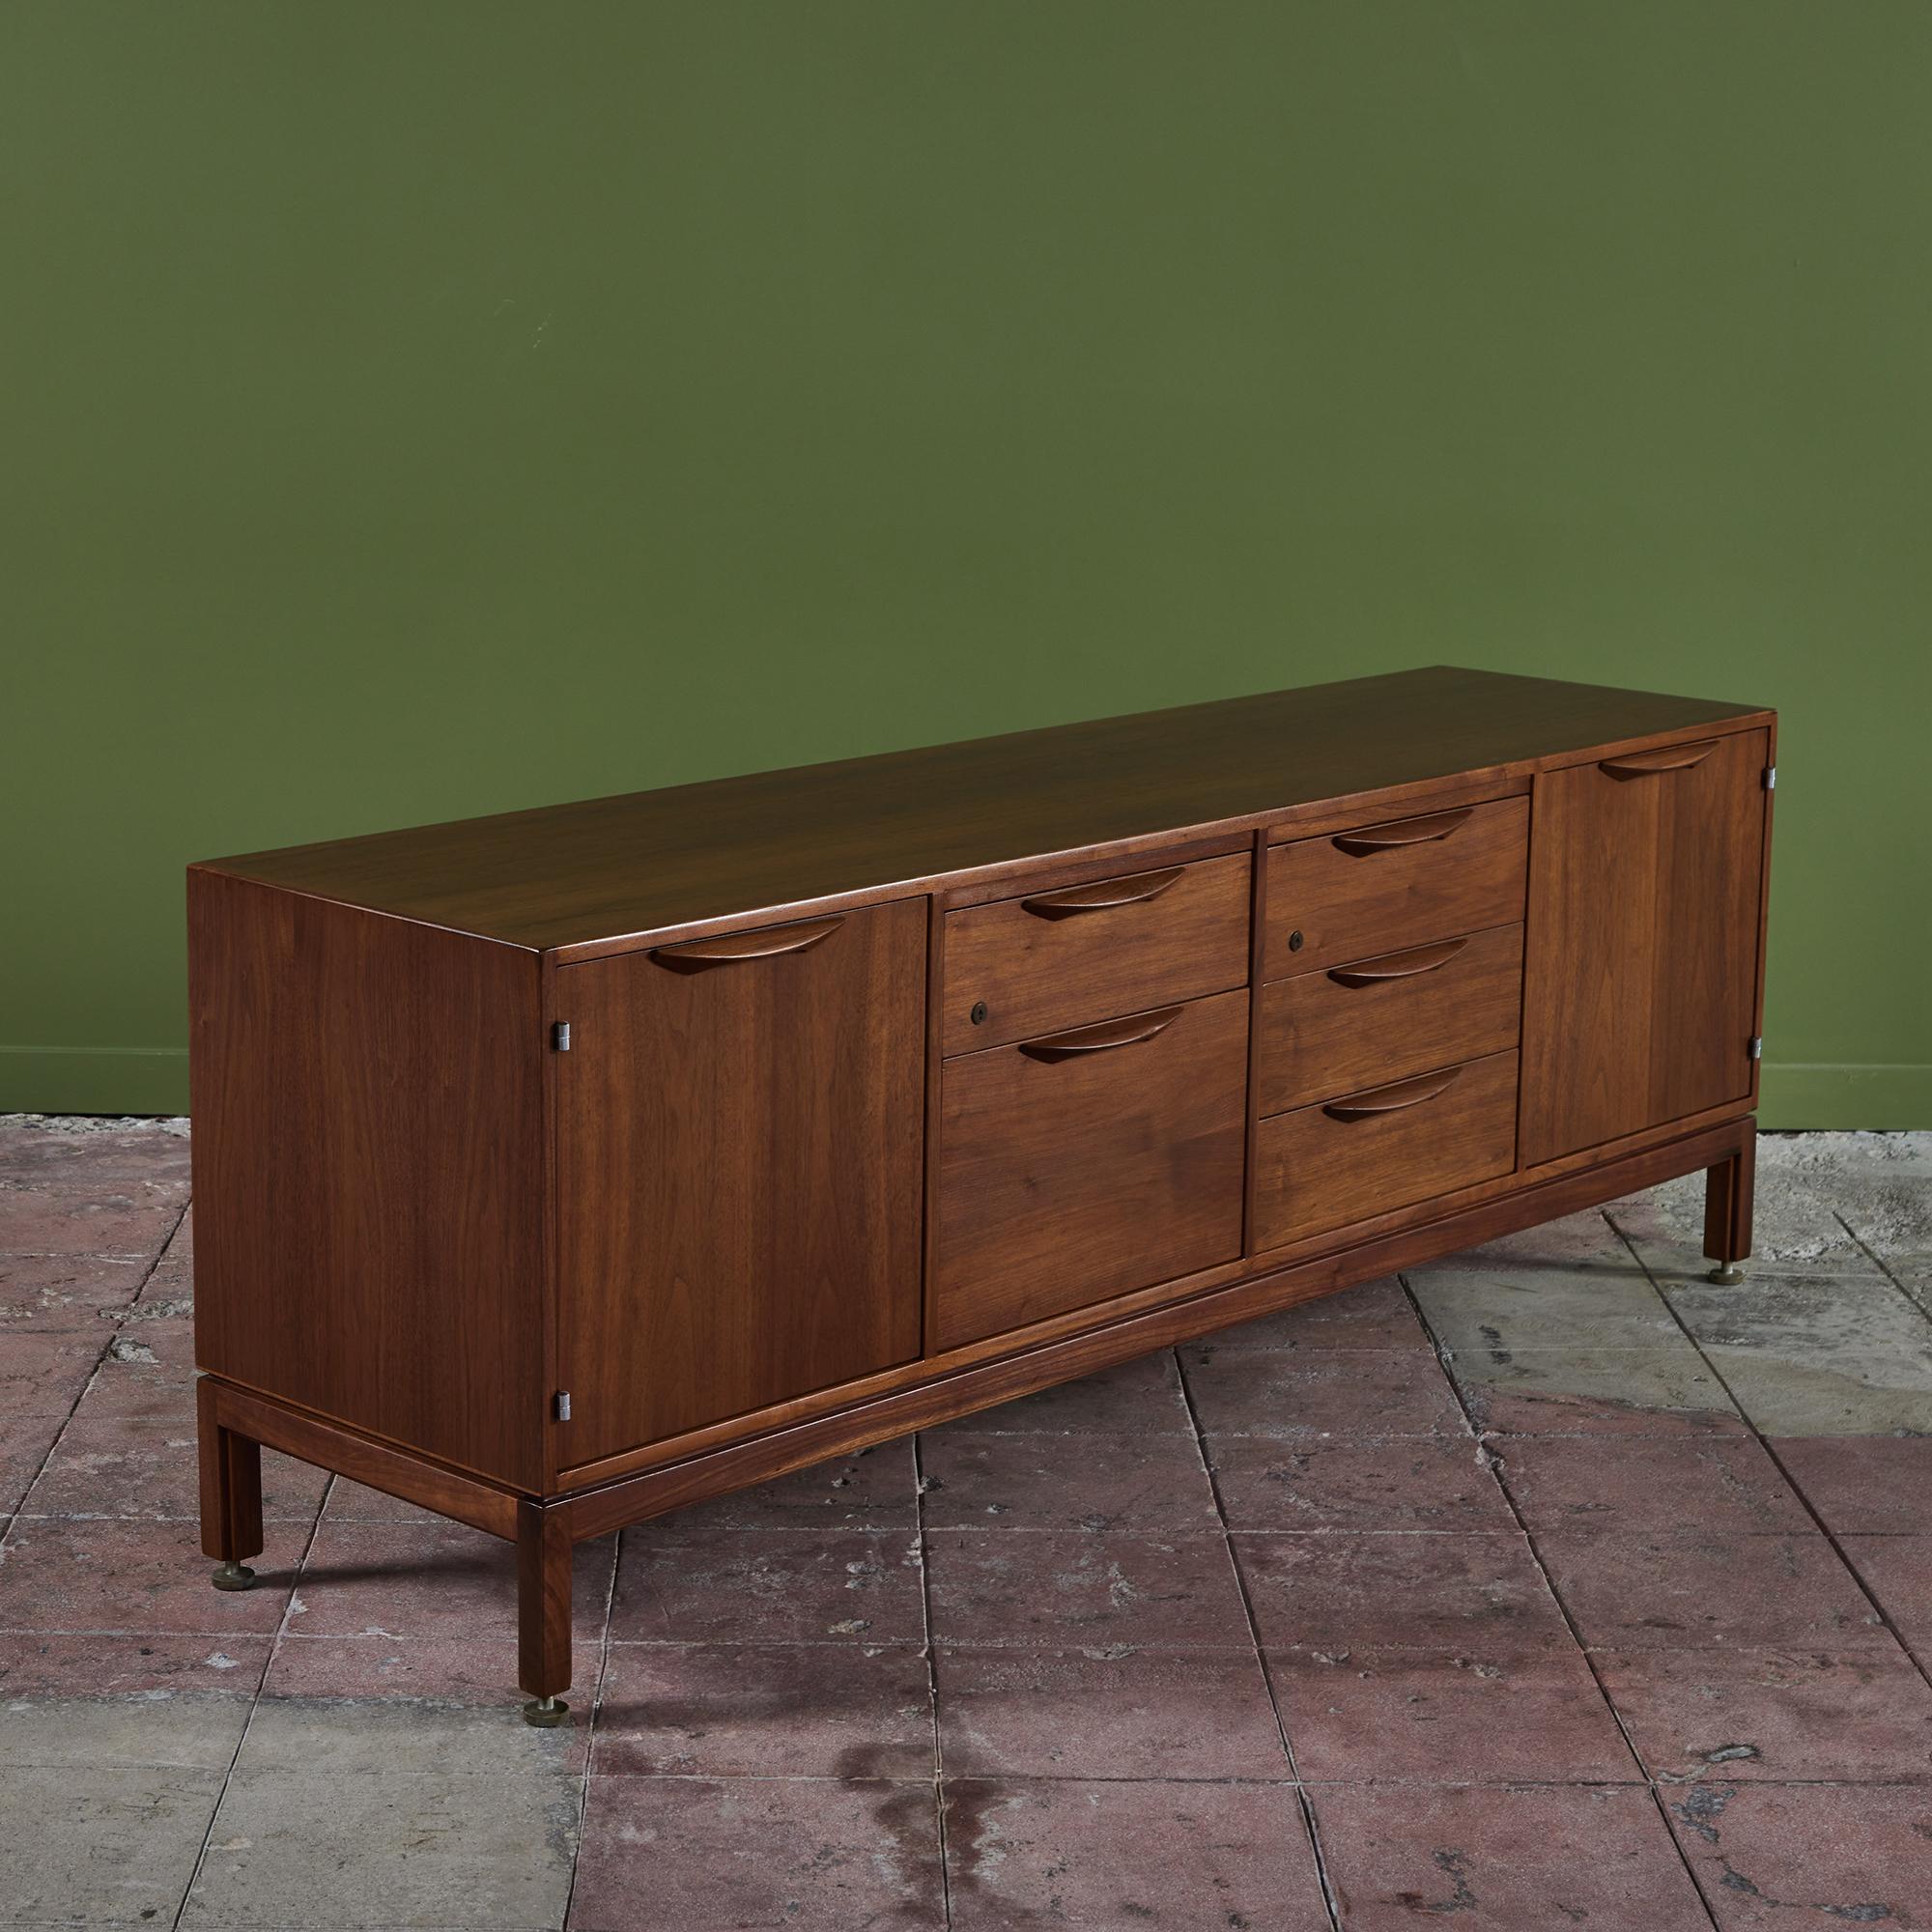 Designed by Jens Risom, USA, c.1960s. This Walnut credenza features two compartments with door fonts and interior adjustable shelves. At the center of the credenza are five drawers, one of which is rather deep and two that are divided into